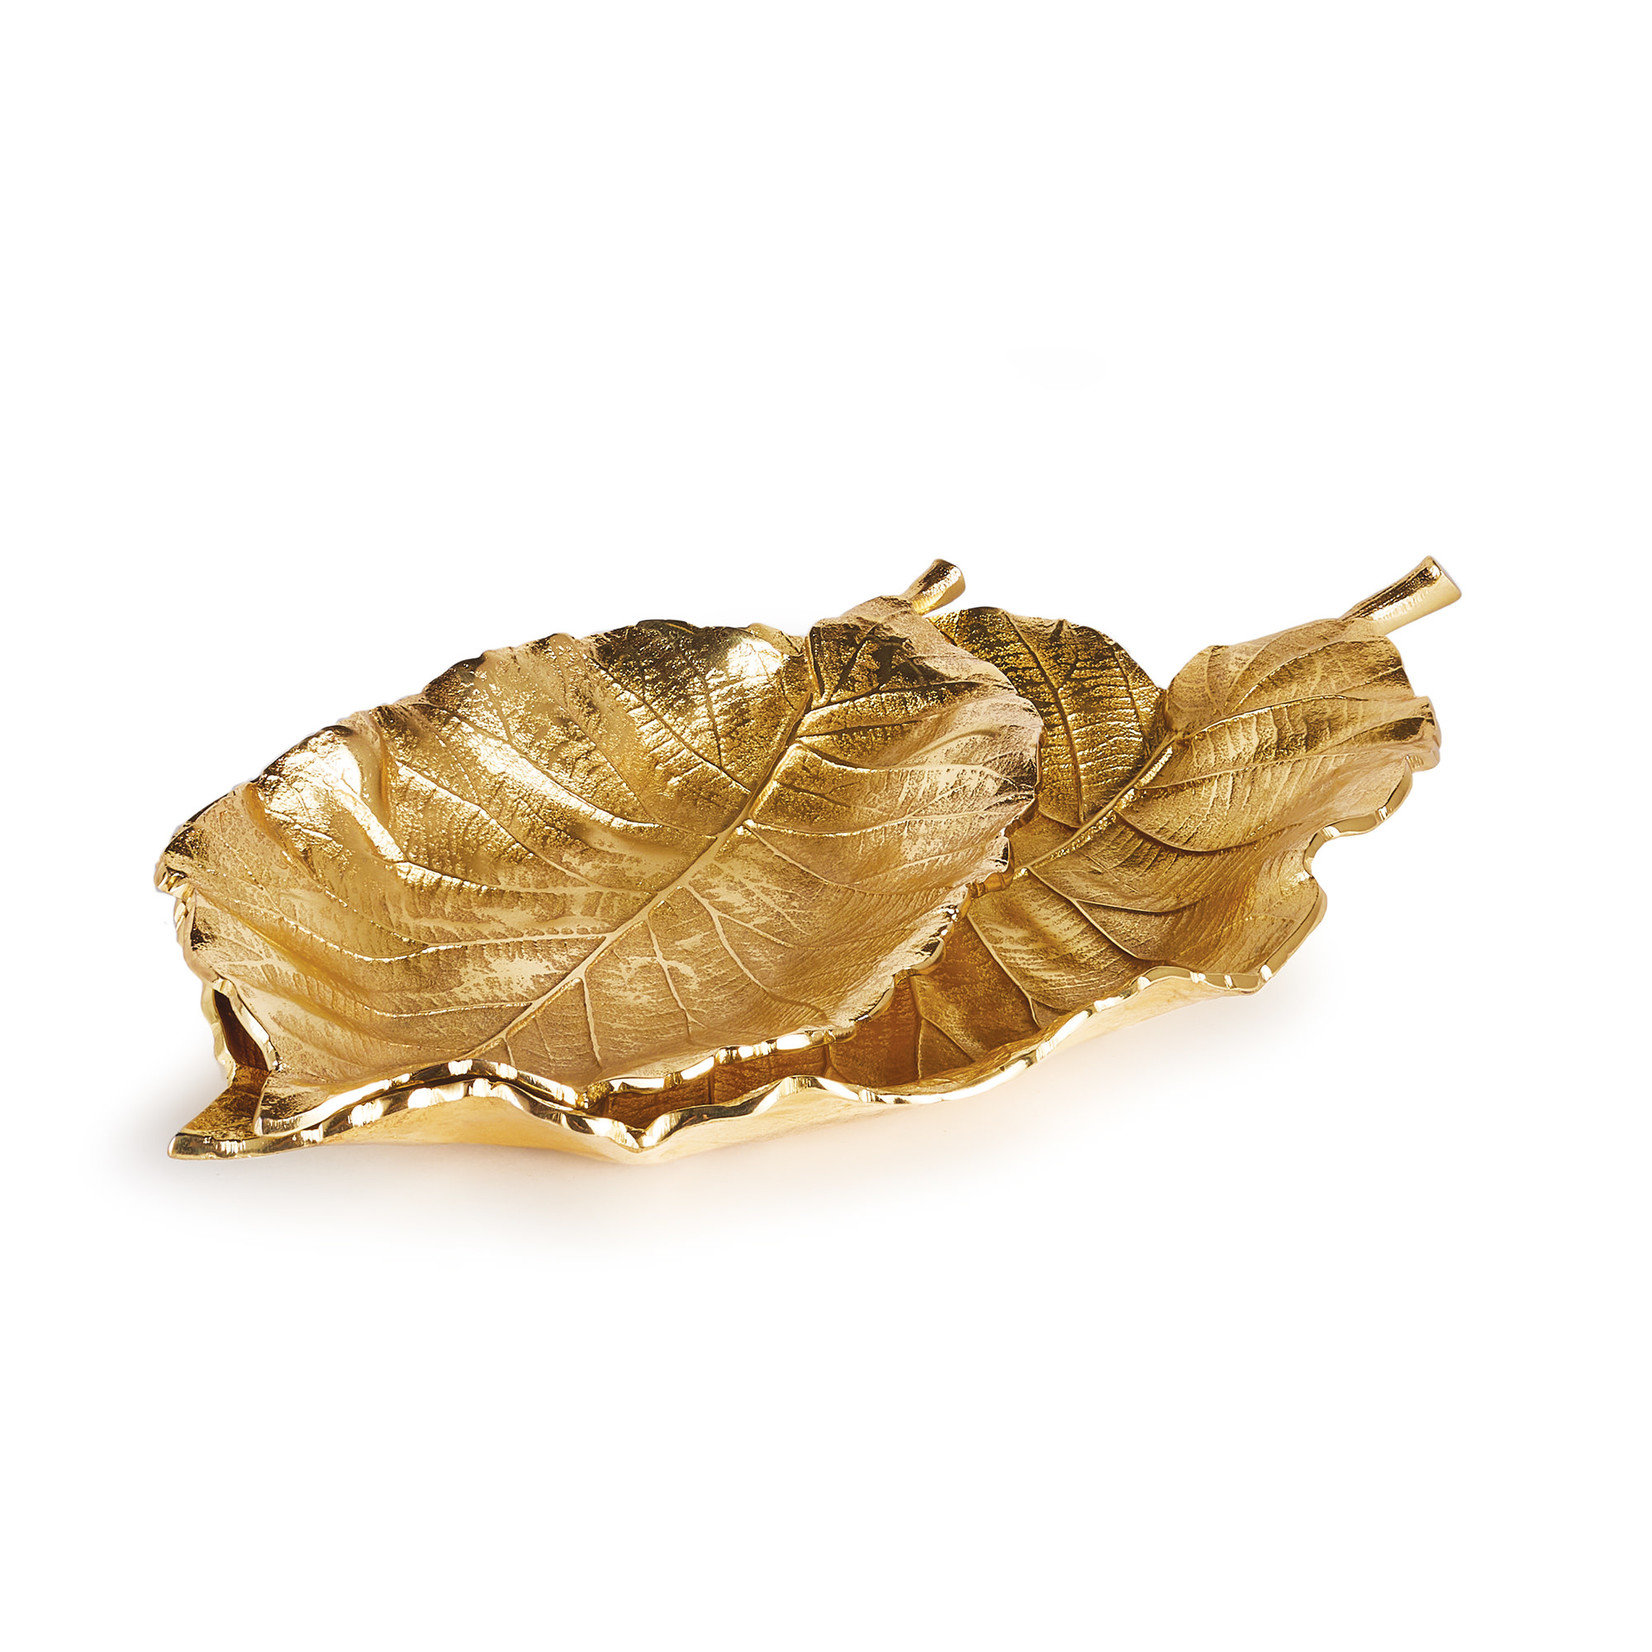 Napa Home and Garden Gold Leaf Tray S/2